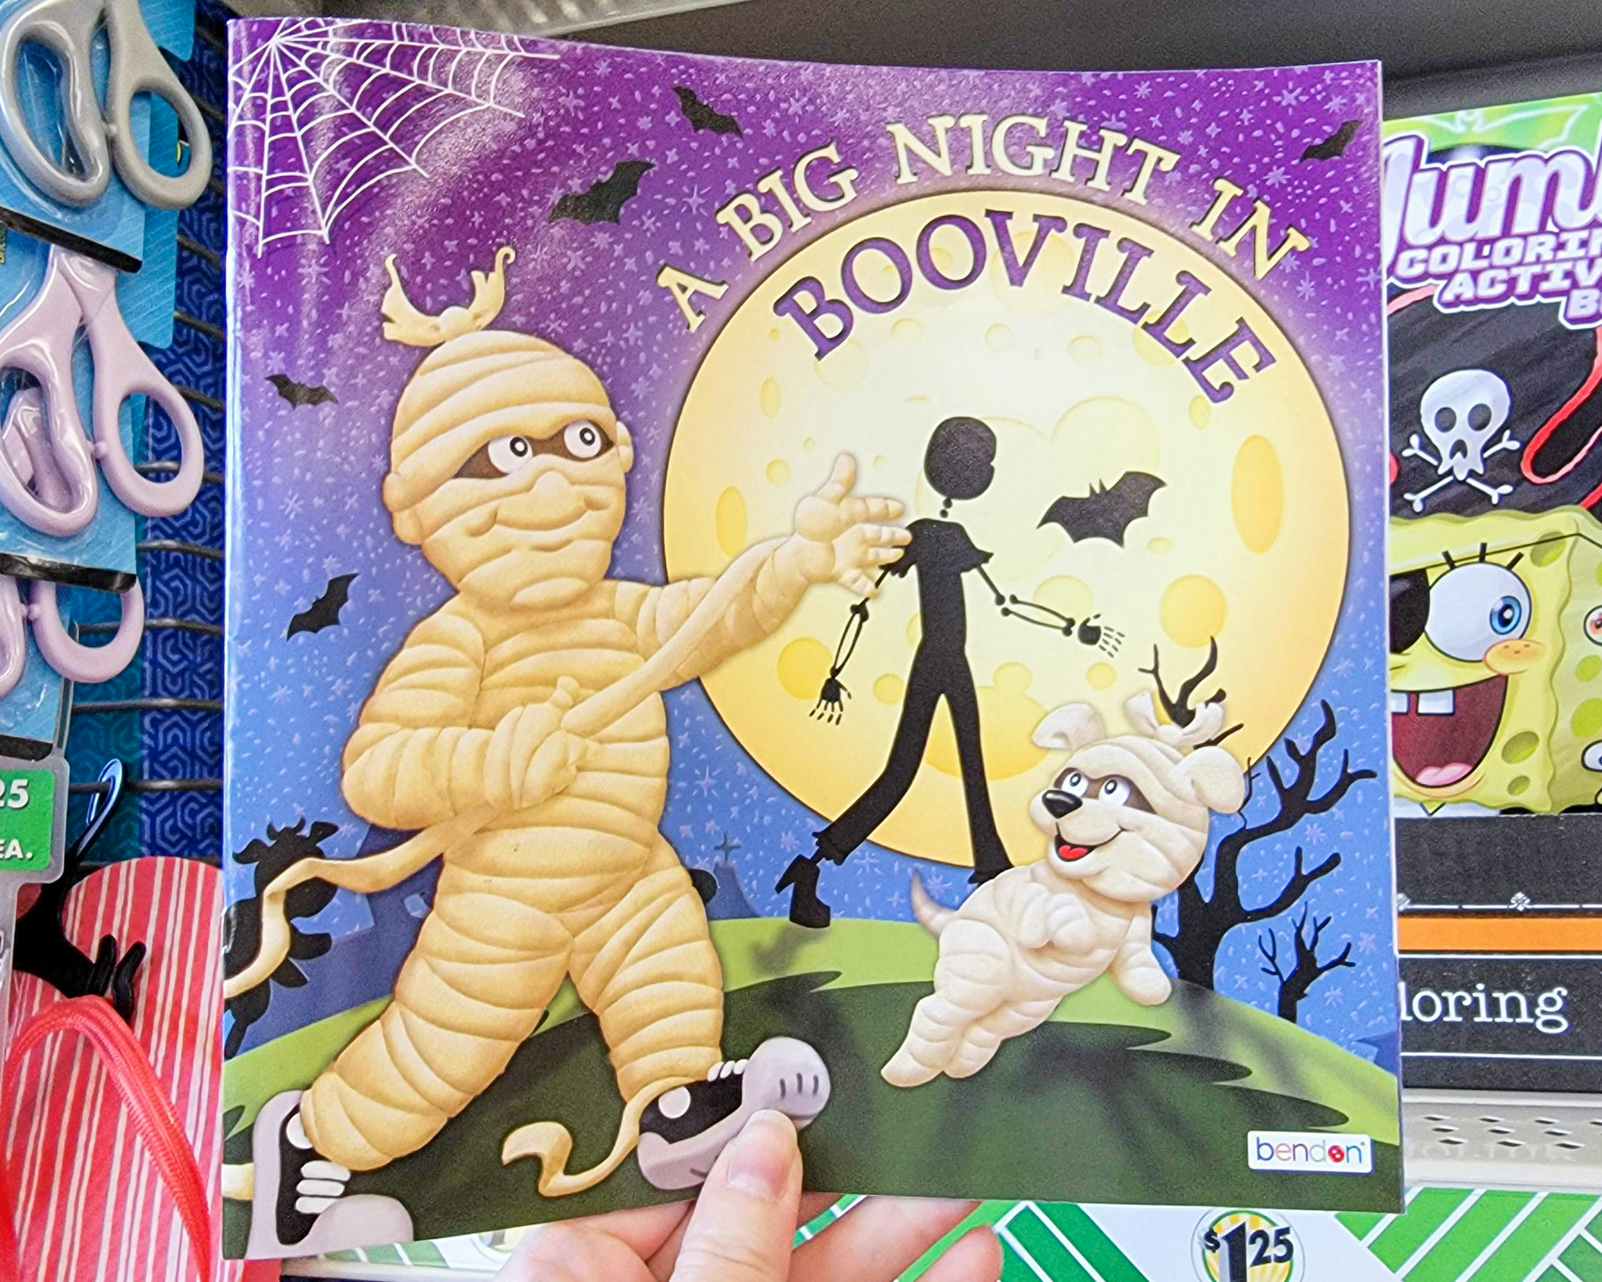 hand holding a paperback kids book named a big night in booville